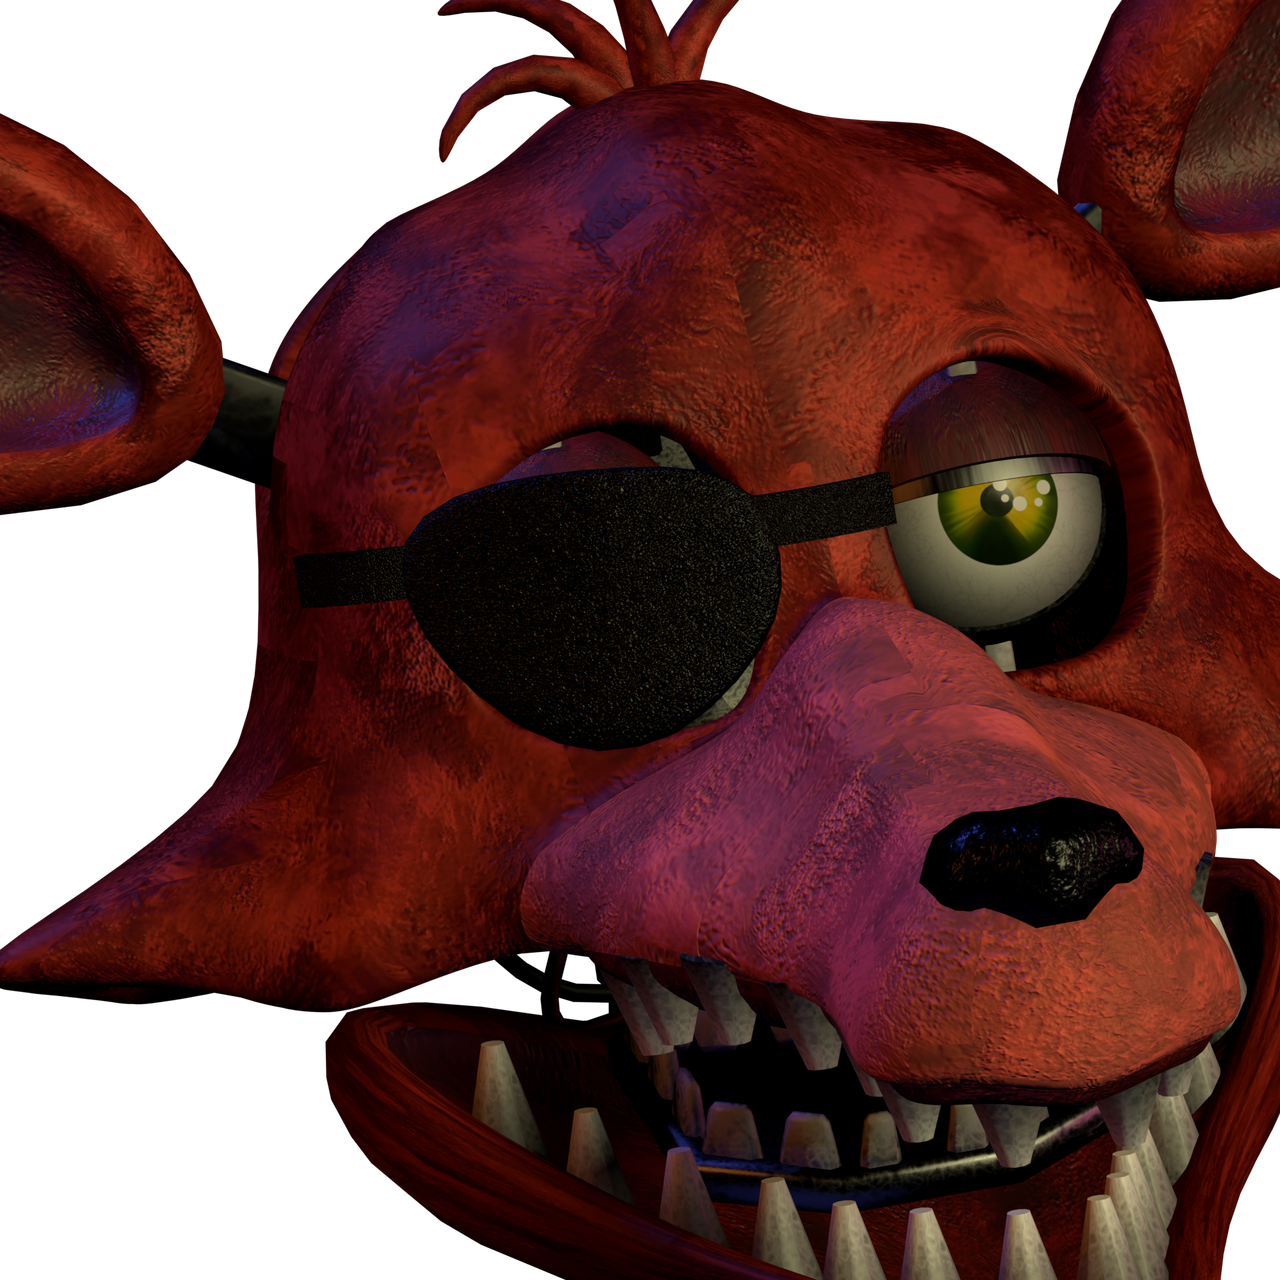 Taddy_Dudstare on X: fixed foxy ufmp edit i made a while back #FNAF   / X